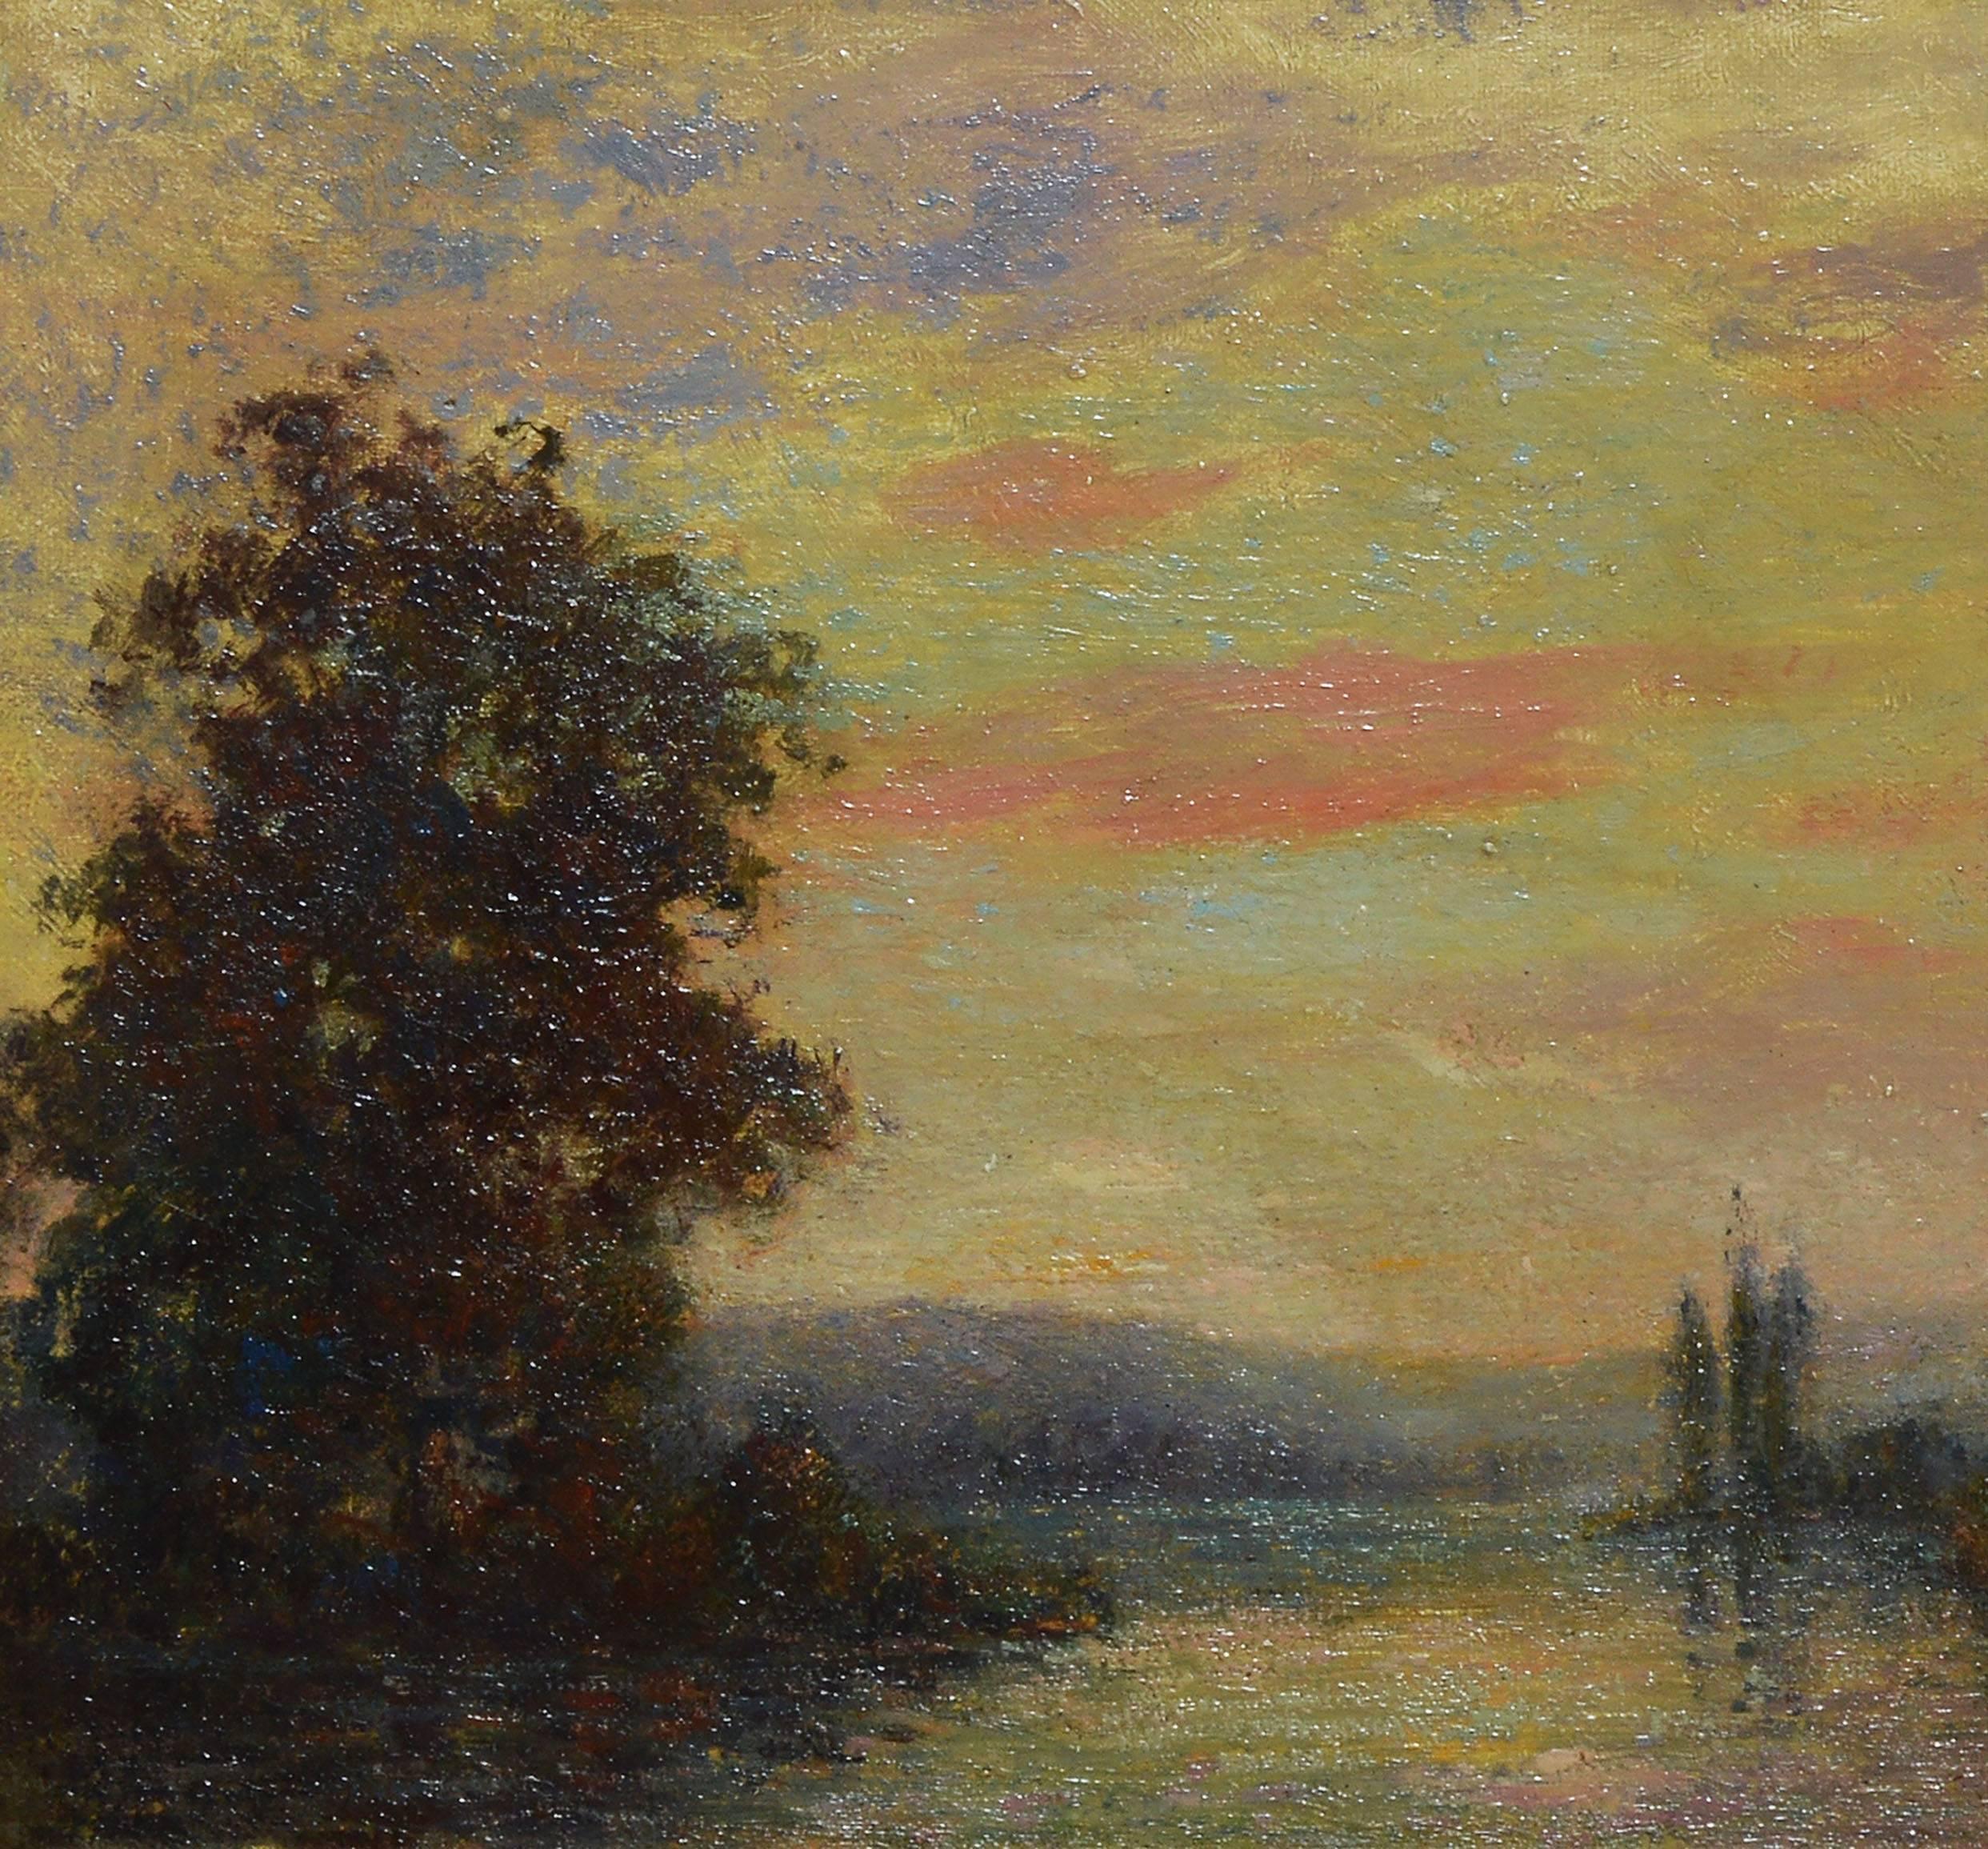 Impressionist style landscape at sunset by Frederick James Boston (1855-1932). Oil on board, circa 1890. Signed lower right, 